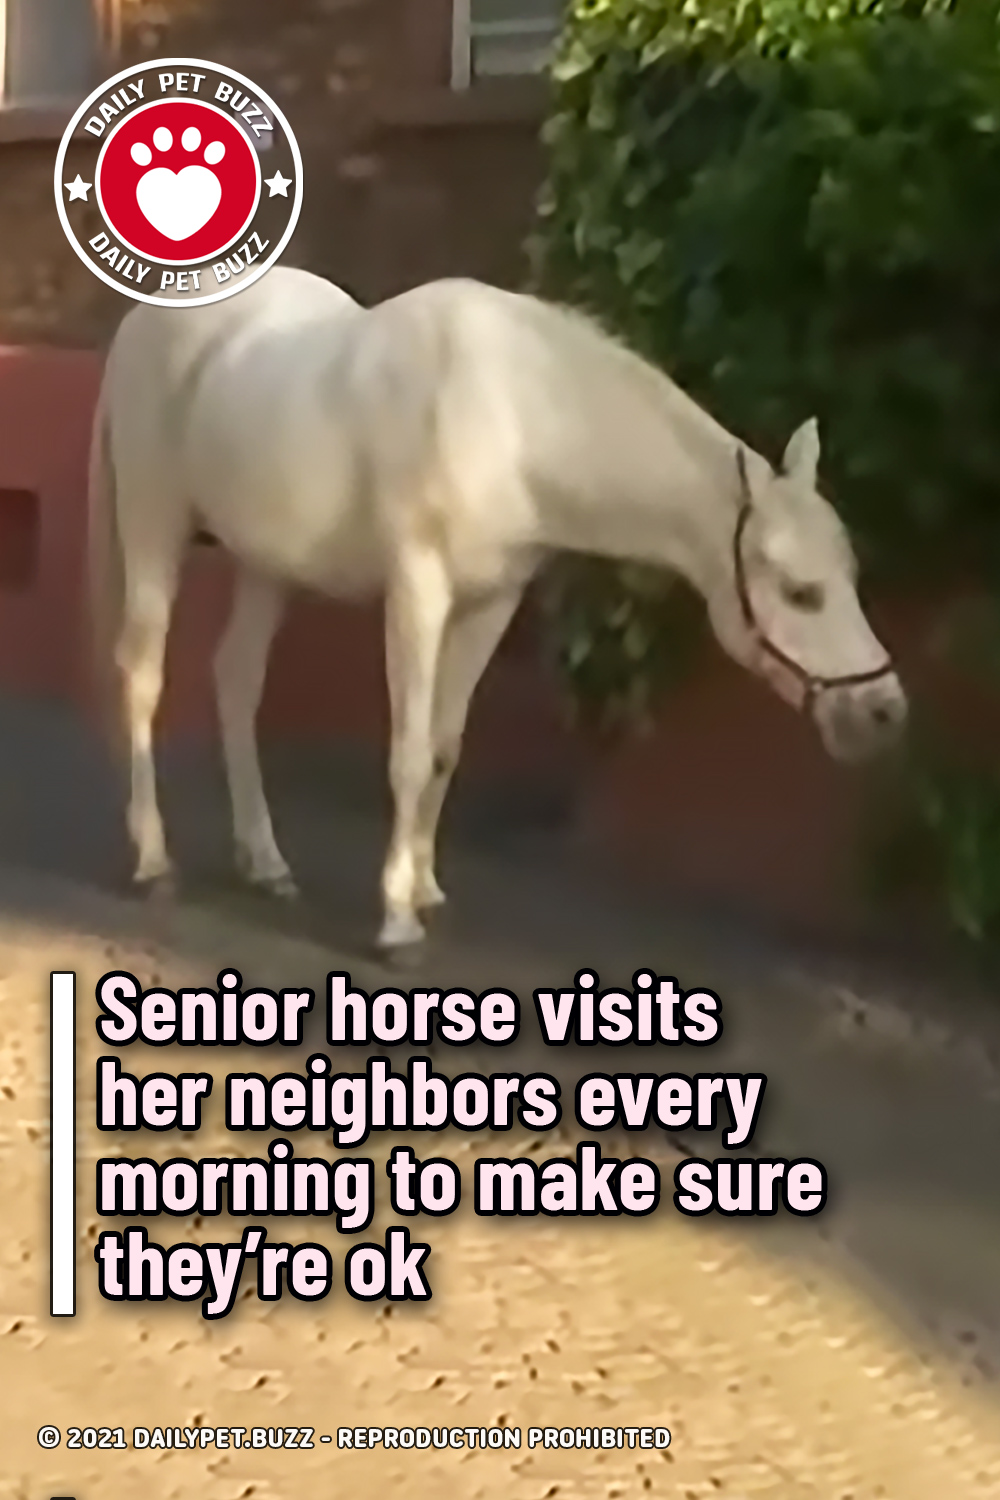 Senior horse visits her neighbors every morning to make sure they’re ok